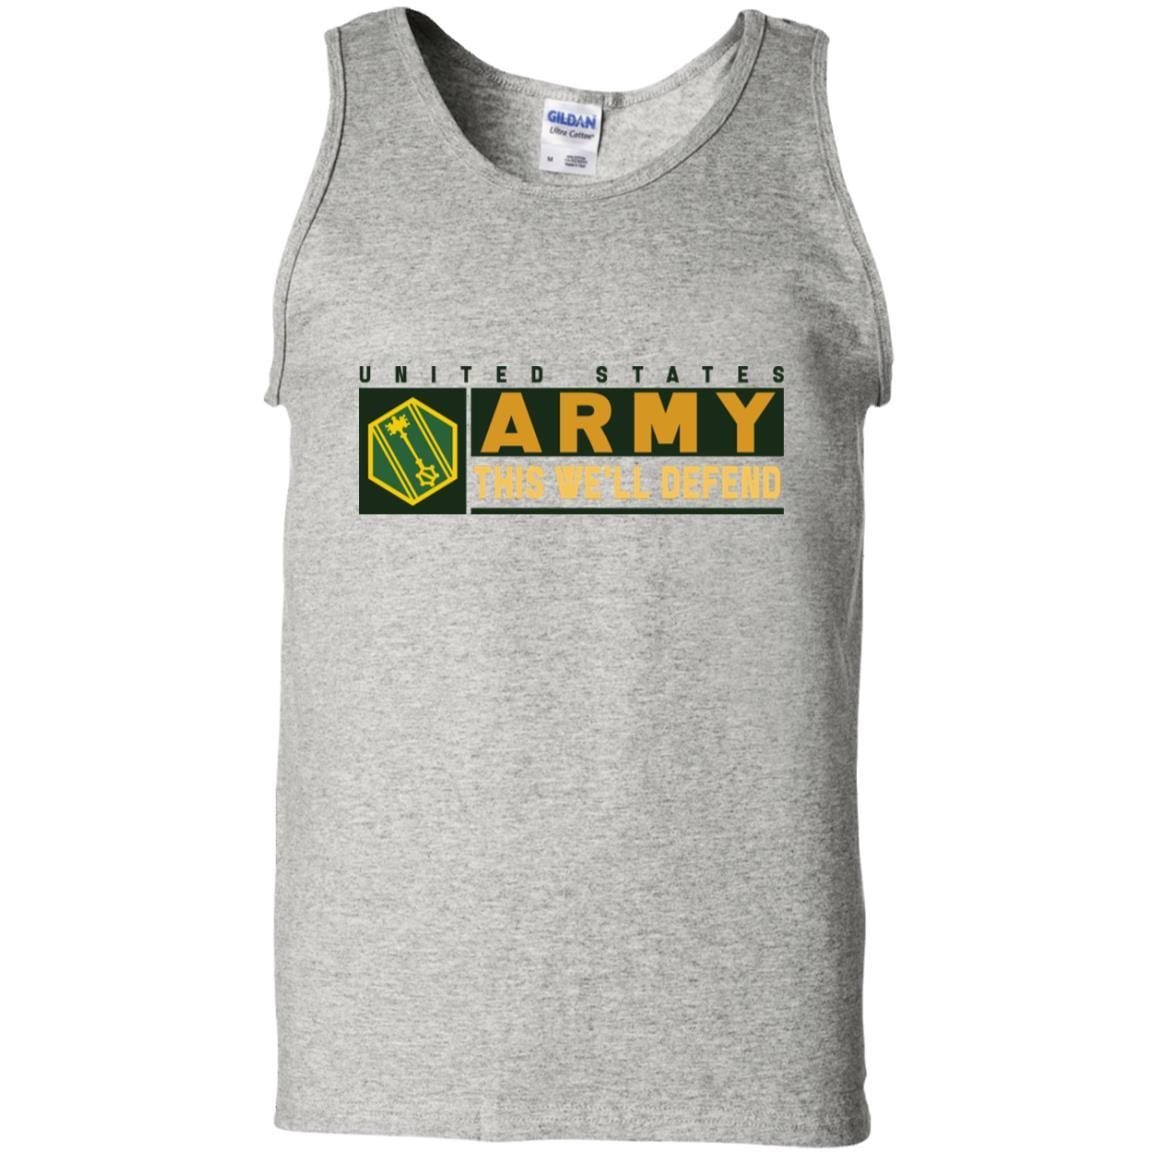 US Army 46TH MILITARY POLICE COMMAND- This We'll Defend T-Shirt On Front For Men-TShirt-Army-Veterans Nation